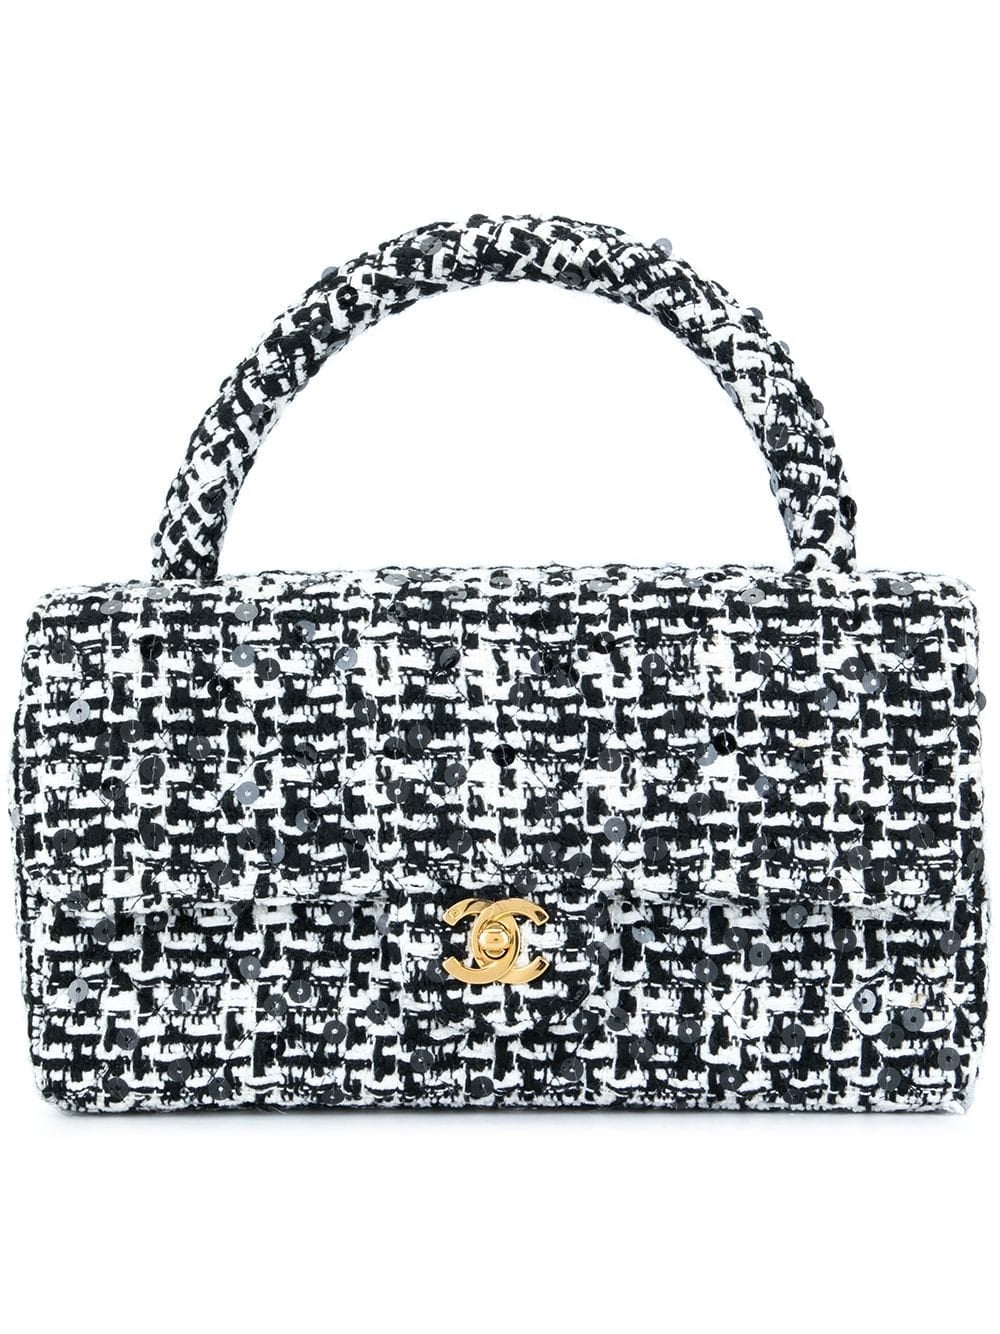 Chanel Coco Handle - 94 For Sale on 1stDibs  large coco handle bag, chanel  coco handle small price, chanel coco handle price 2023